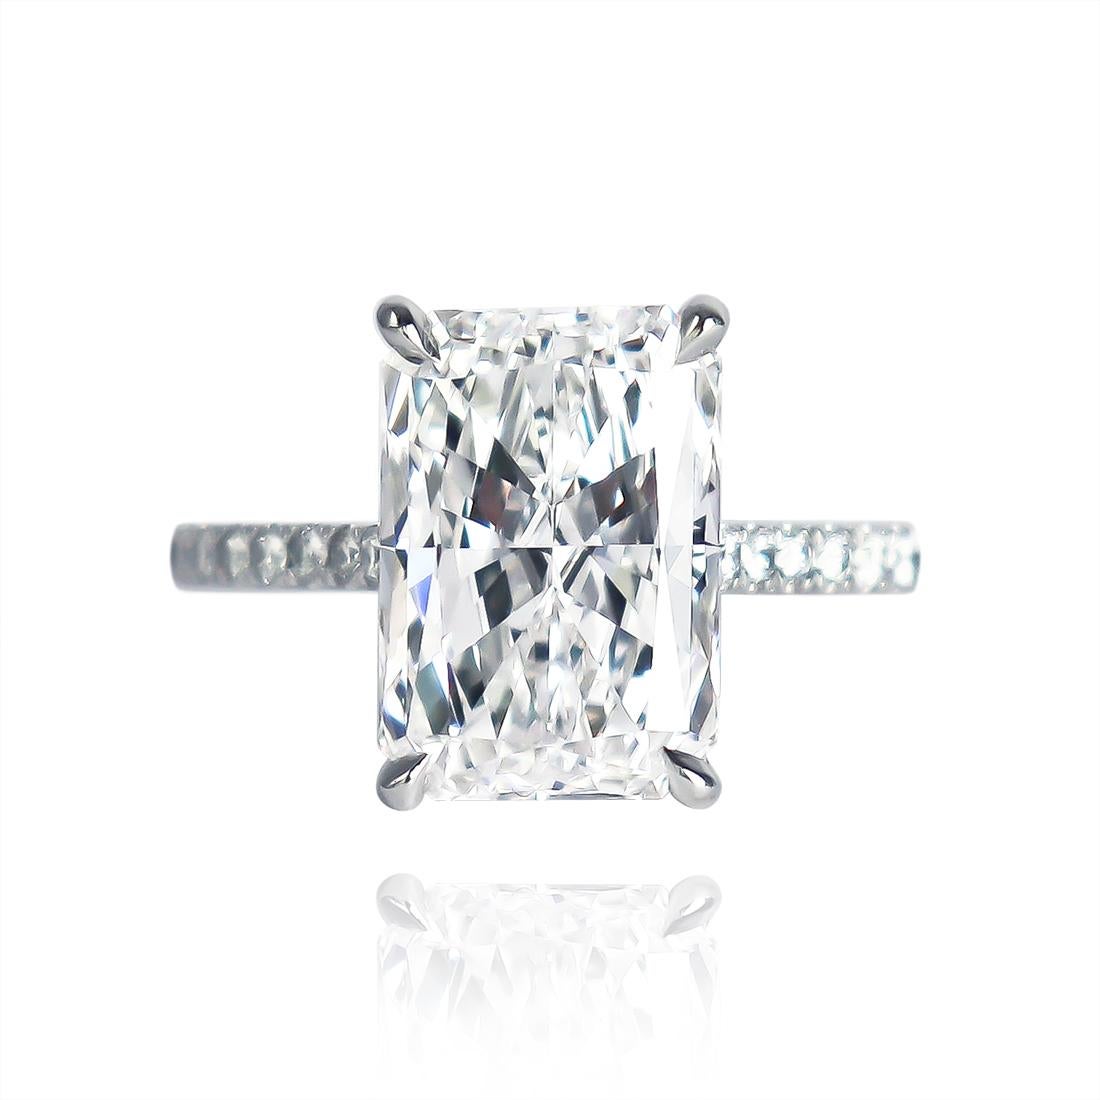 This exquisite ring fresh from the J. Birnbach workshop features a 4.02 carat Radiant cut diamond of E color and VVS2 clarity... Scintillating from every angle, this stone is set in a handmade, platinum ring with pavé details. 

Diamond Ring